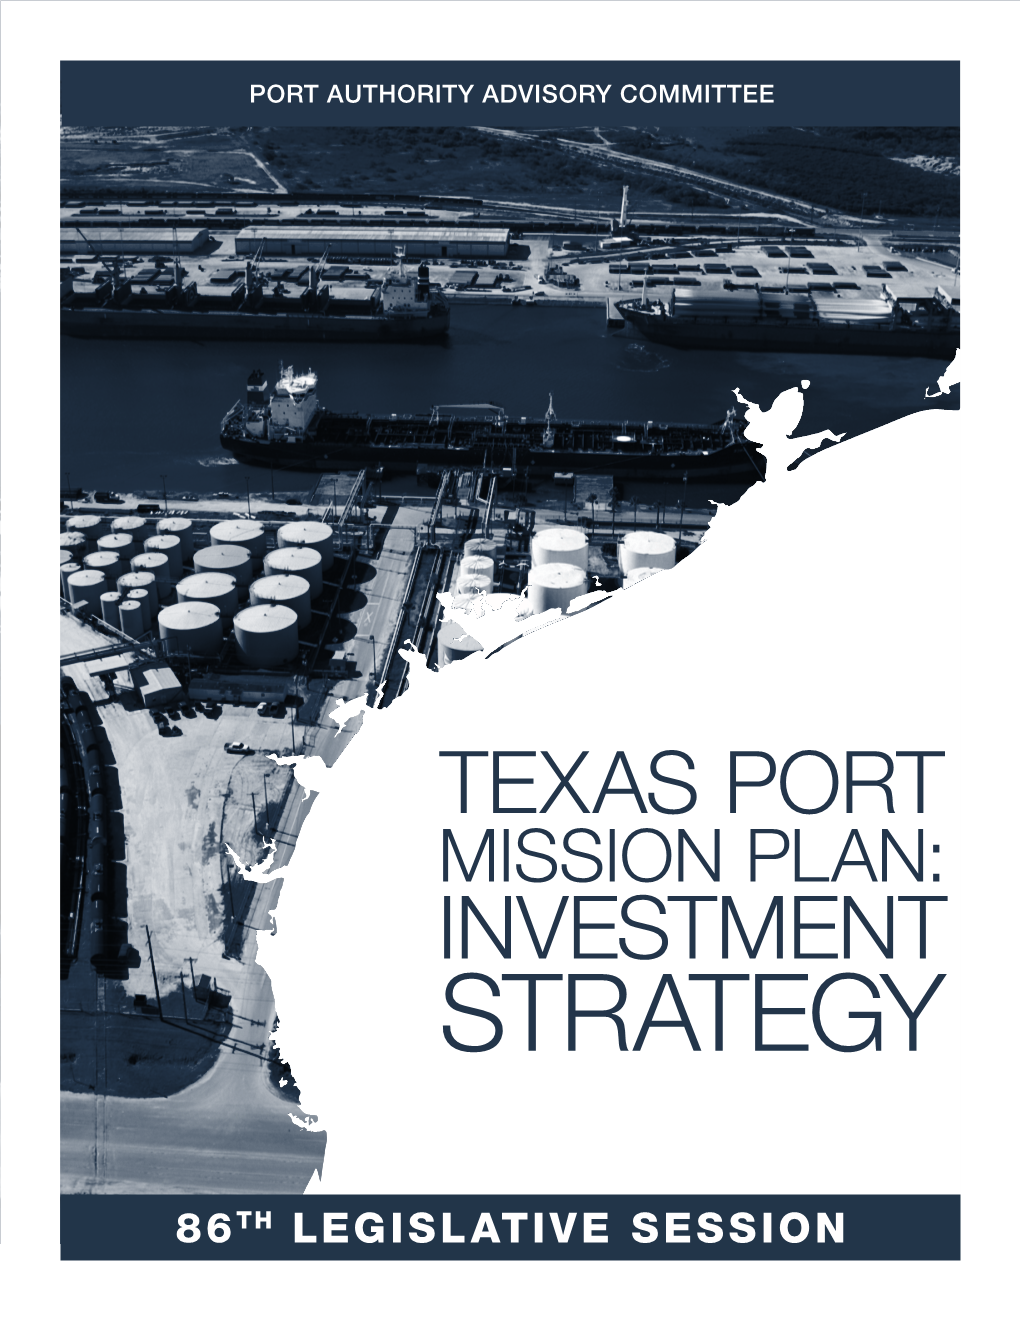 Texas Port Mission Plan: Investment Strategy